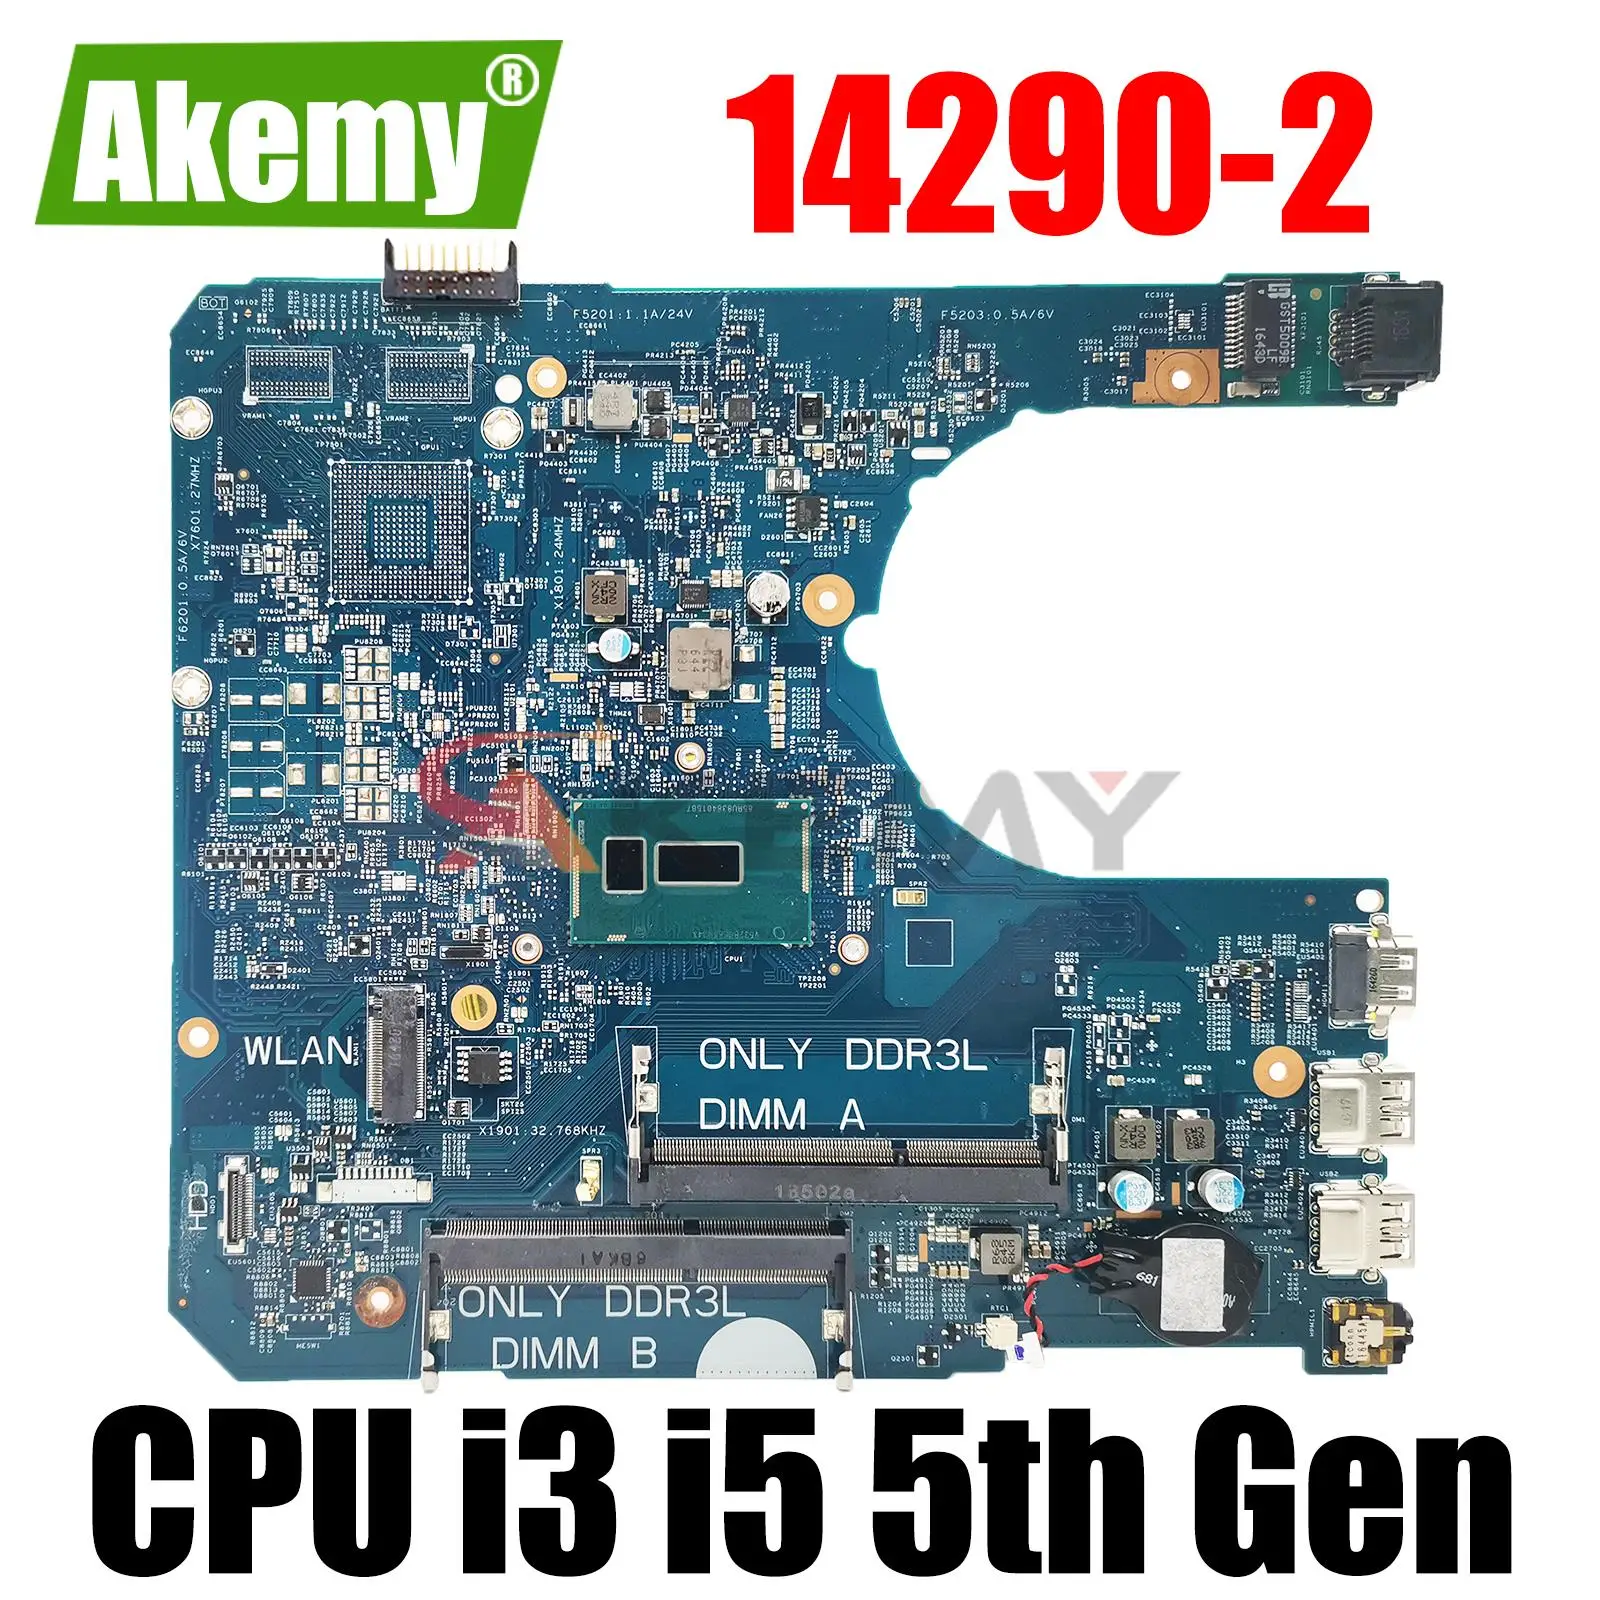 

CN-02F12F 0P9H40 0D0PG7 0CXYD3 For Dell Latitude 3460 3560 Laptop Motherboard 14290-2 PWB:85GK8 With 3215U 3825U I3 I5 CPU DDR3